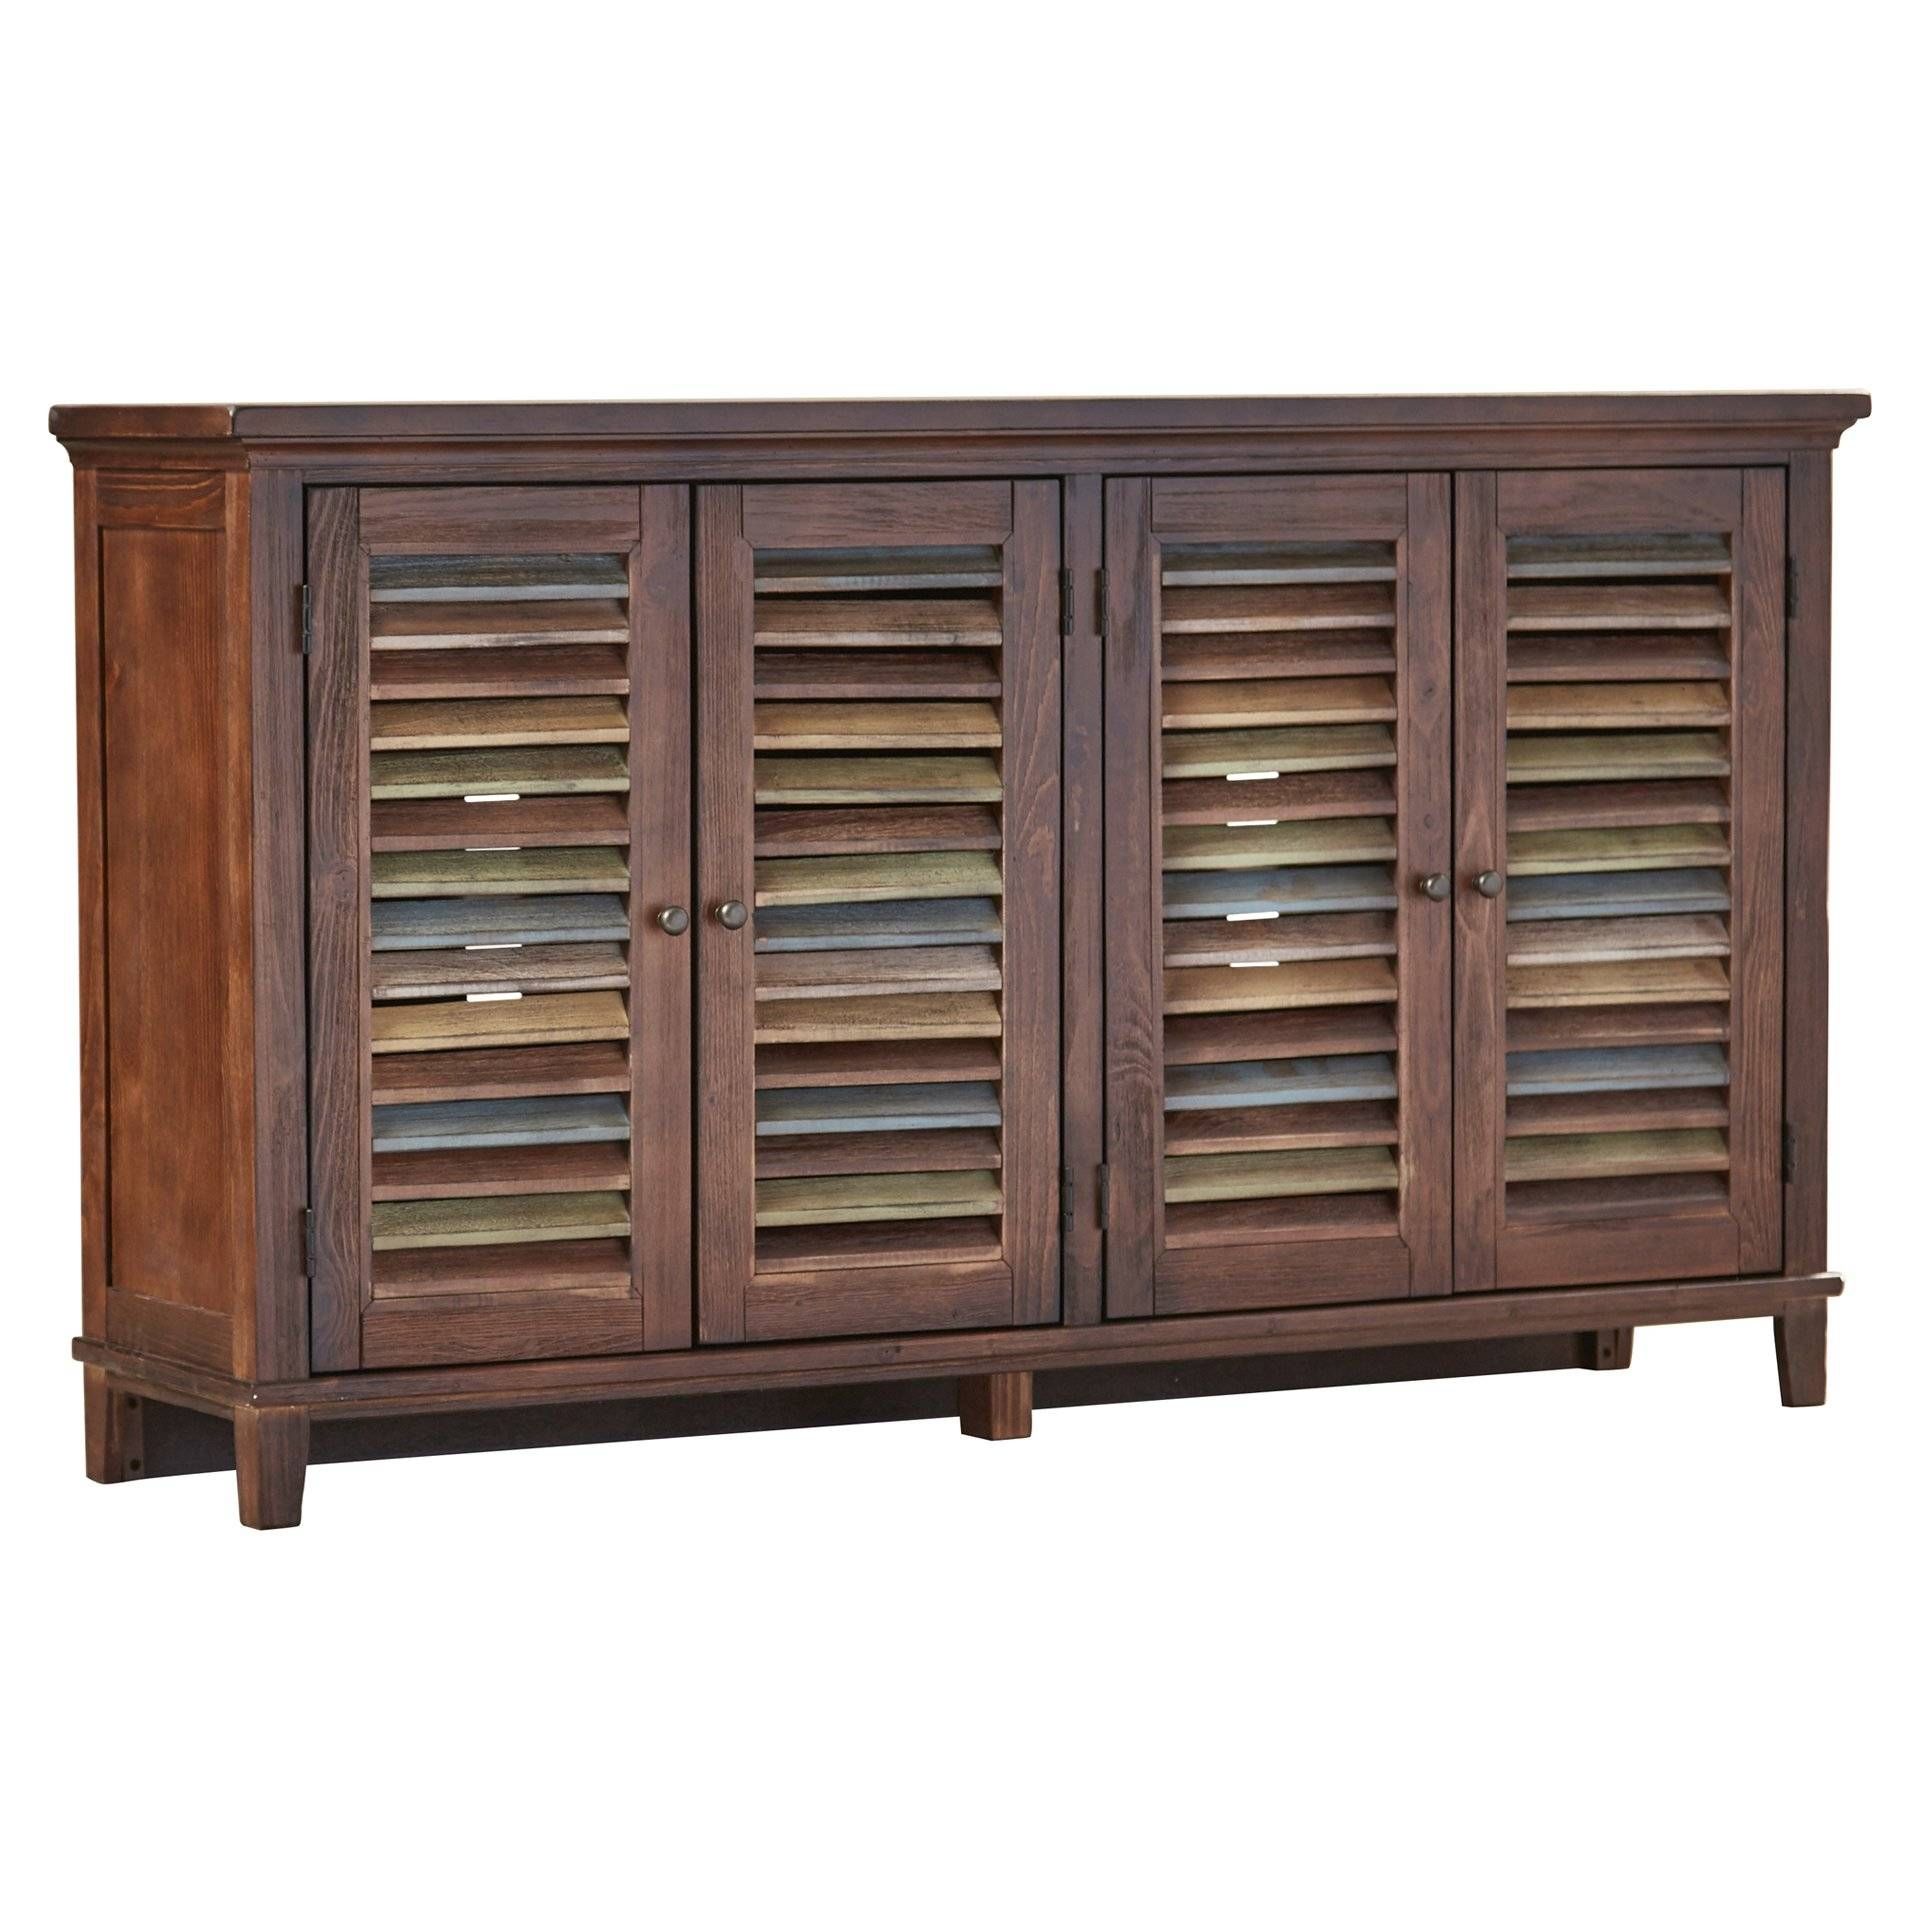 Charlton Home Bolden Sideboard & Reviews | Wayfair Supply Throughout Fully Assembled Sideboards (View 17 of 20)